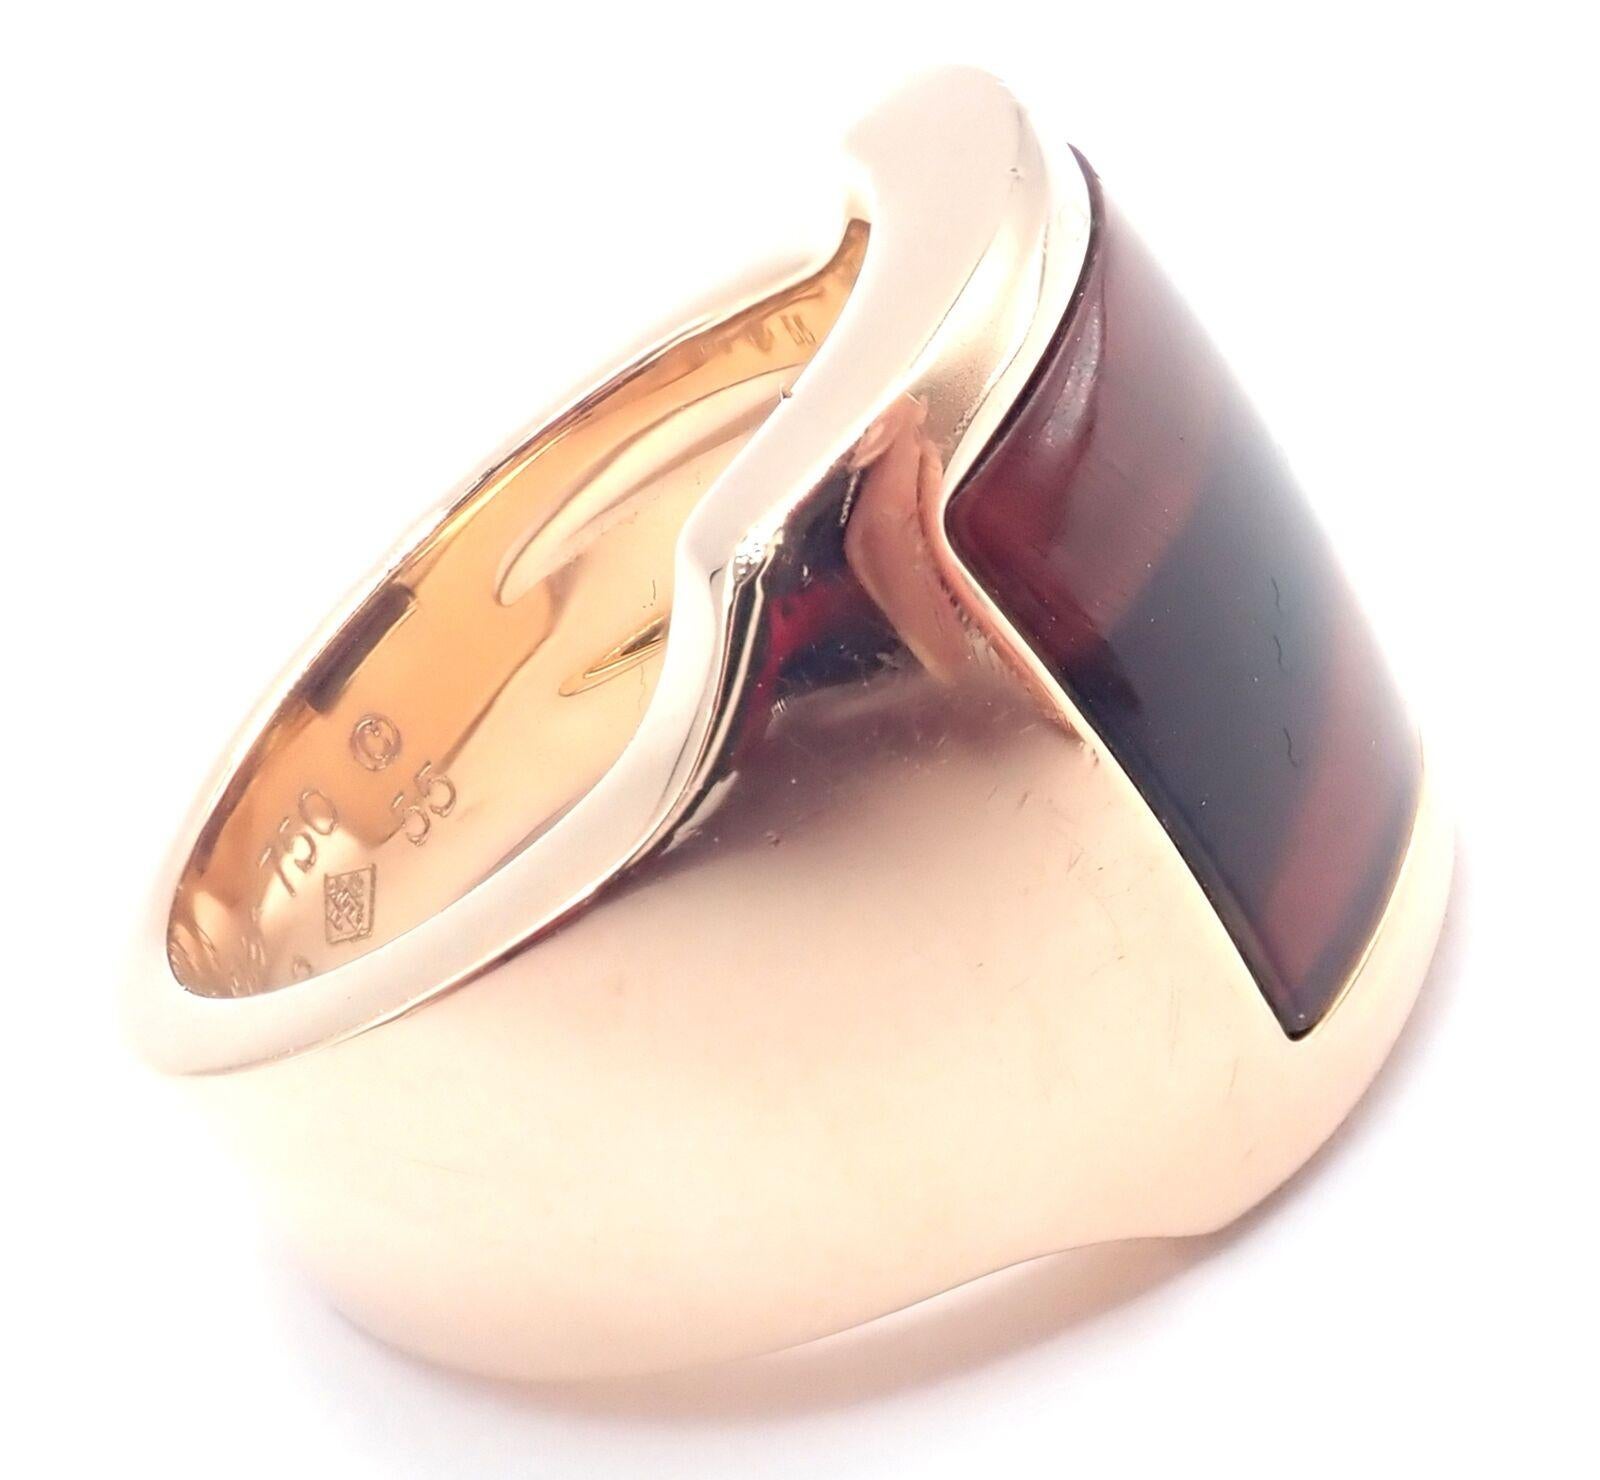 18k Rose Gold Bull's Eye Quartz Santos Dumont Ring by Cartier.  
With 1 Bull's Eye Quartz
The Cartier Santos Dumont Bull Eye ring is a striking piece of jewelry, crafted from luxurious 18k rose gold. 
Featuring a distinctive bull's eye quartz